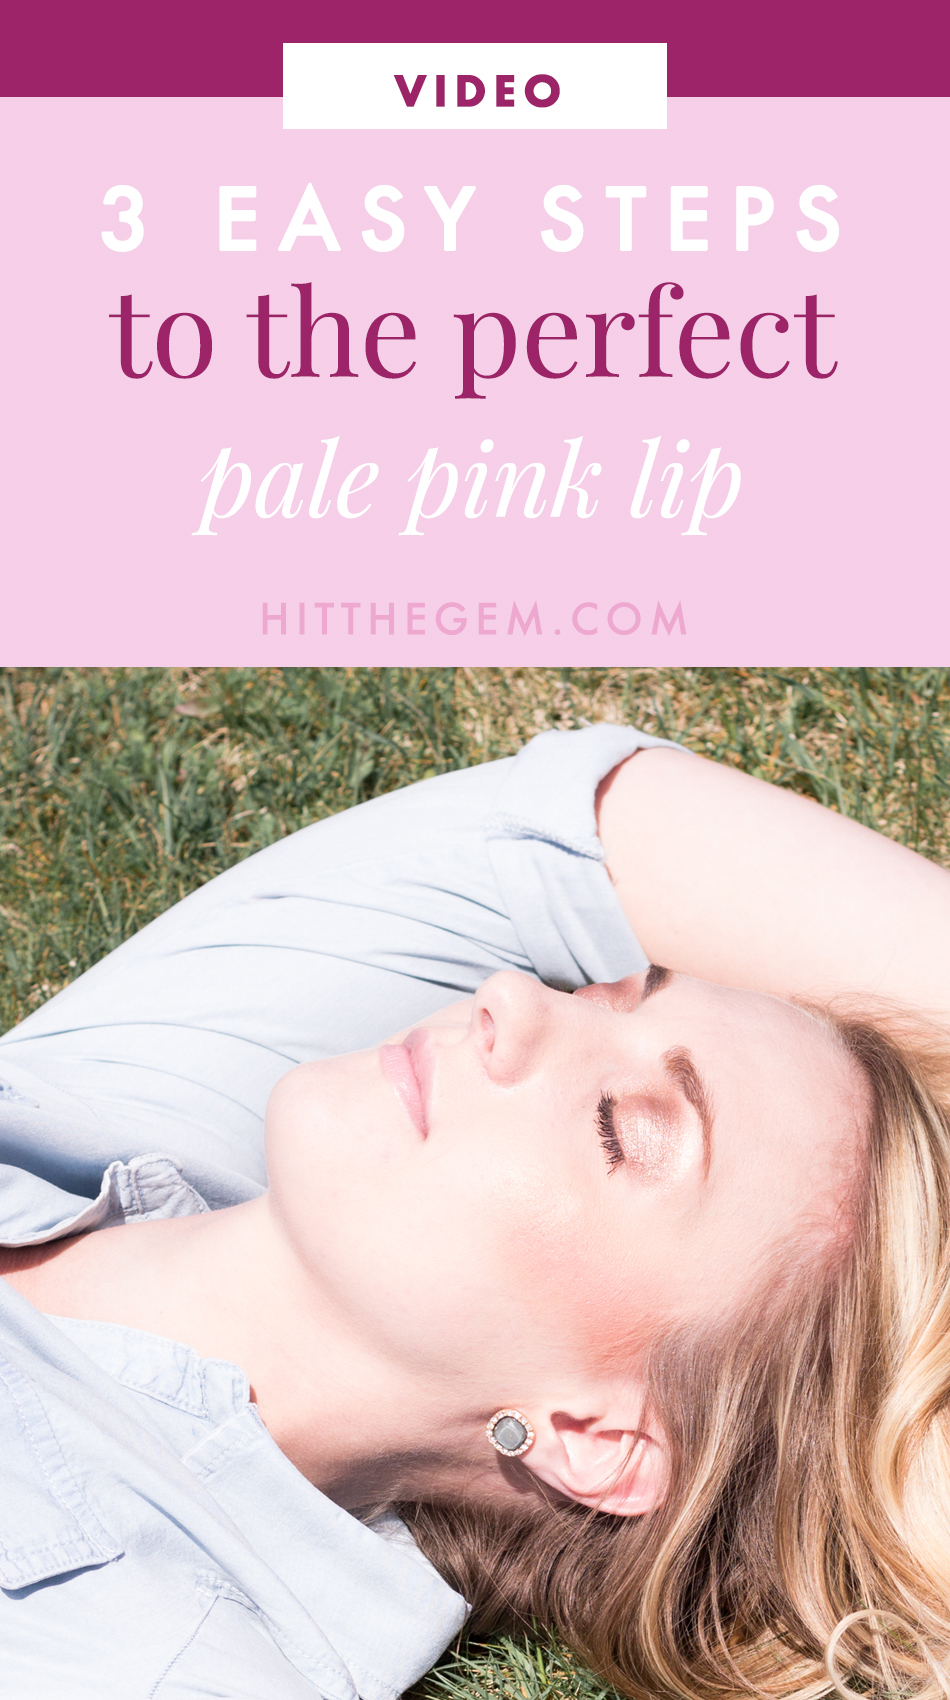 With warm weather comes less, well, everything: clothes, stress, work, makeup, etc. Today's post and video focuses on getting that perfect neutral pale pink lip. For me, it's a difficult balance to find because of my pale skin, so I thought I would share this tutorial to help those of you in a similar situation!